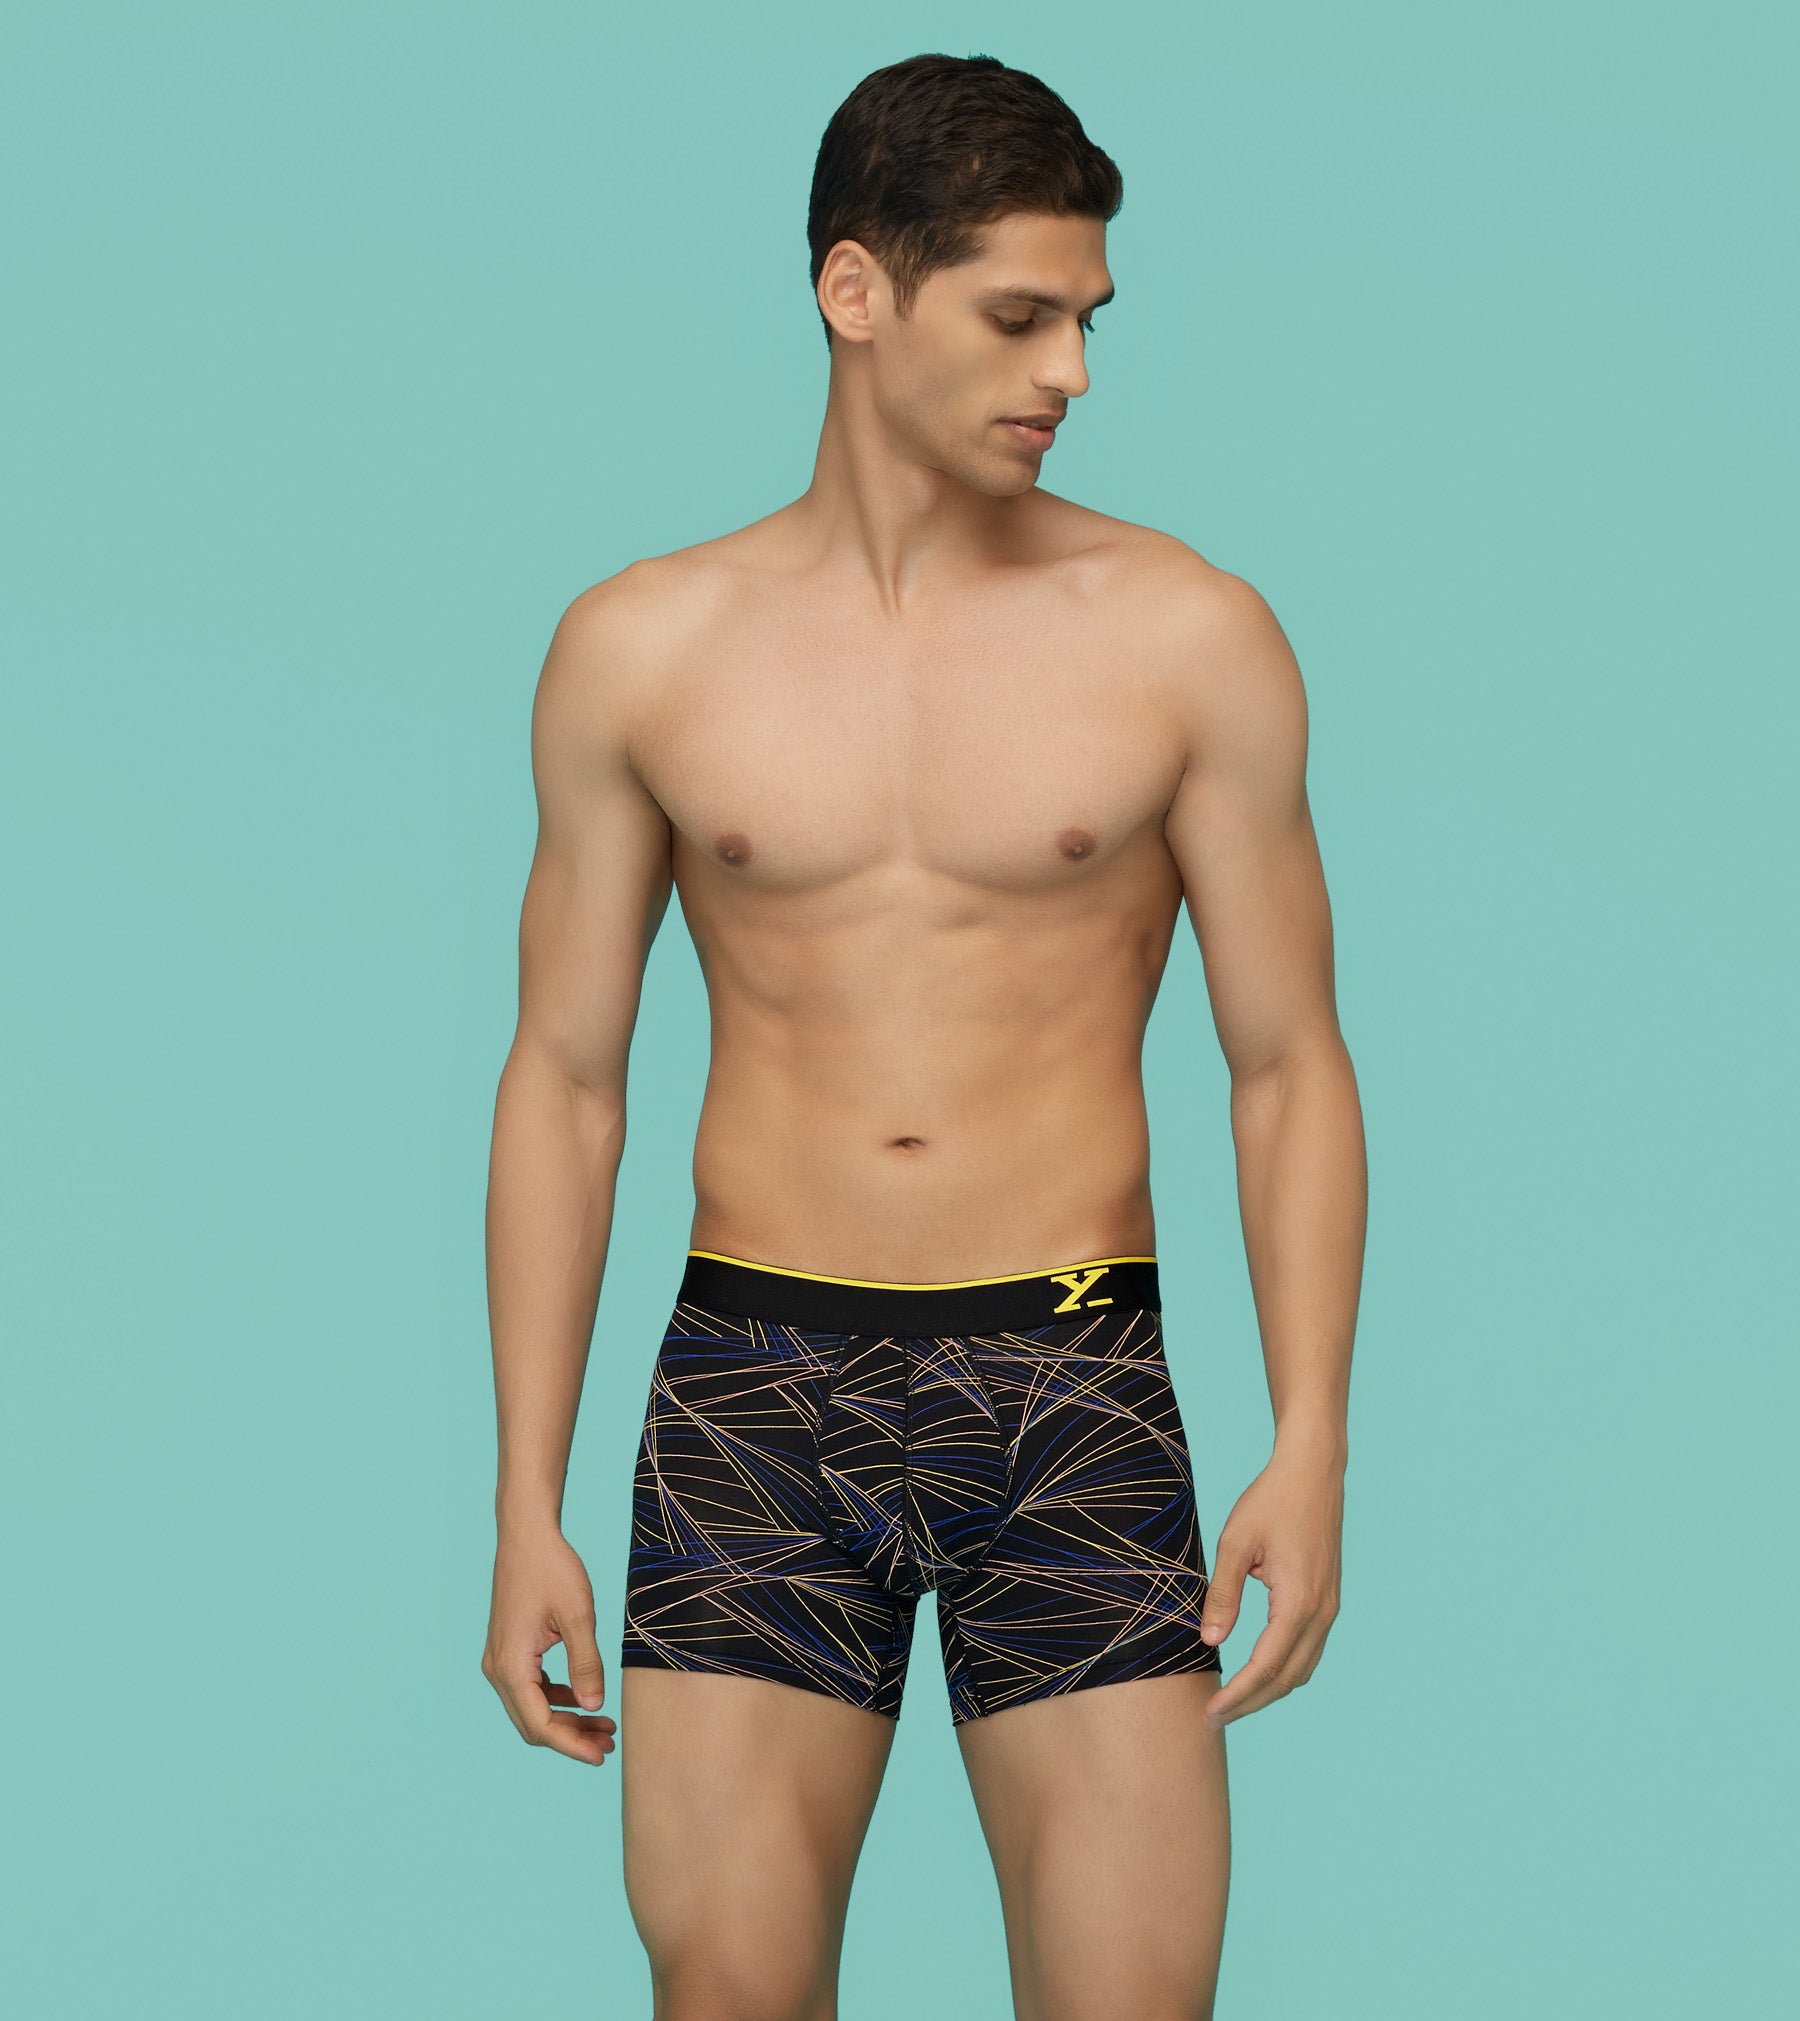 Buy Poomer Men's Trunk (Sunny Day Trunks Without Pokets-IE-XL, Brown,  X-Large) at